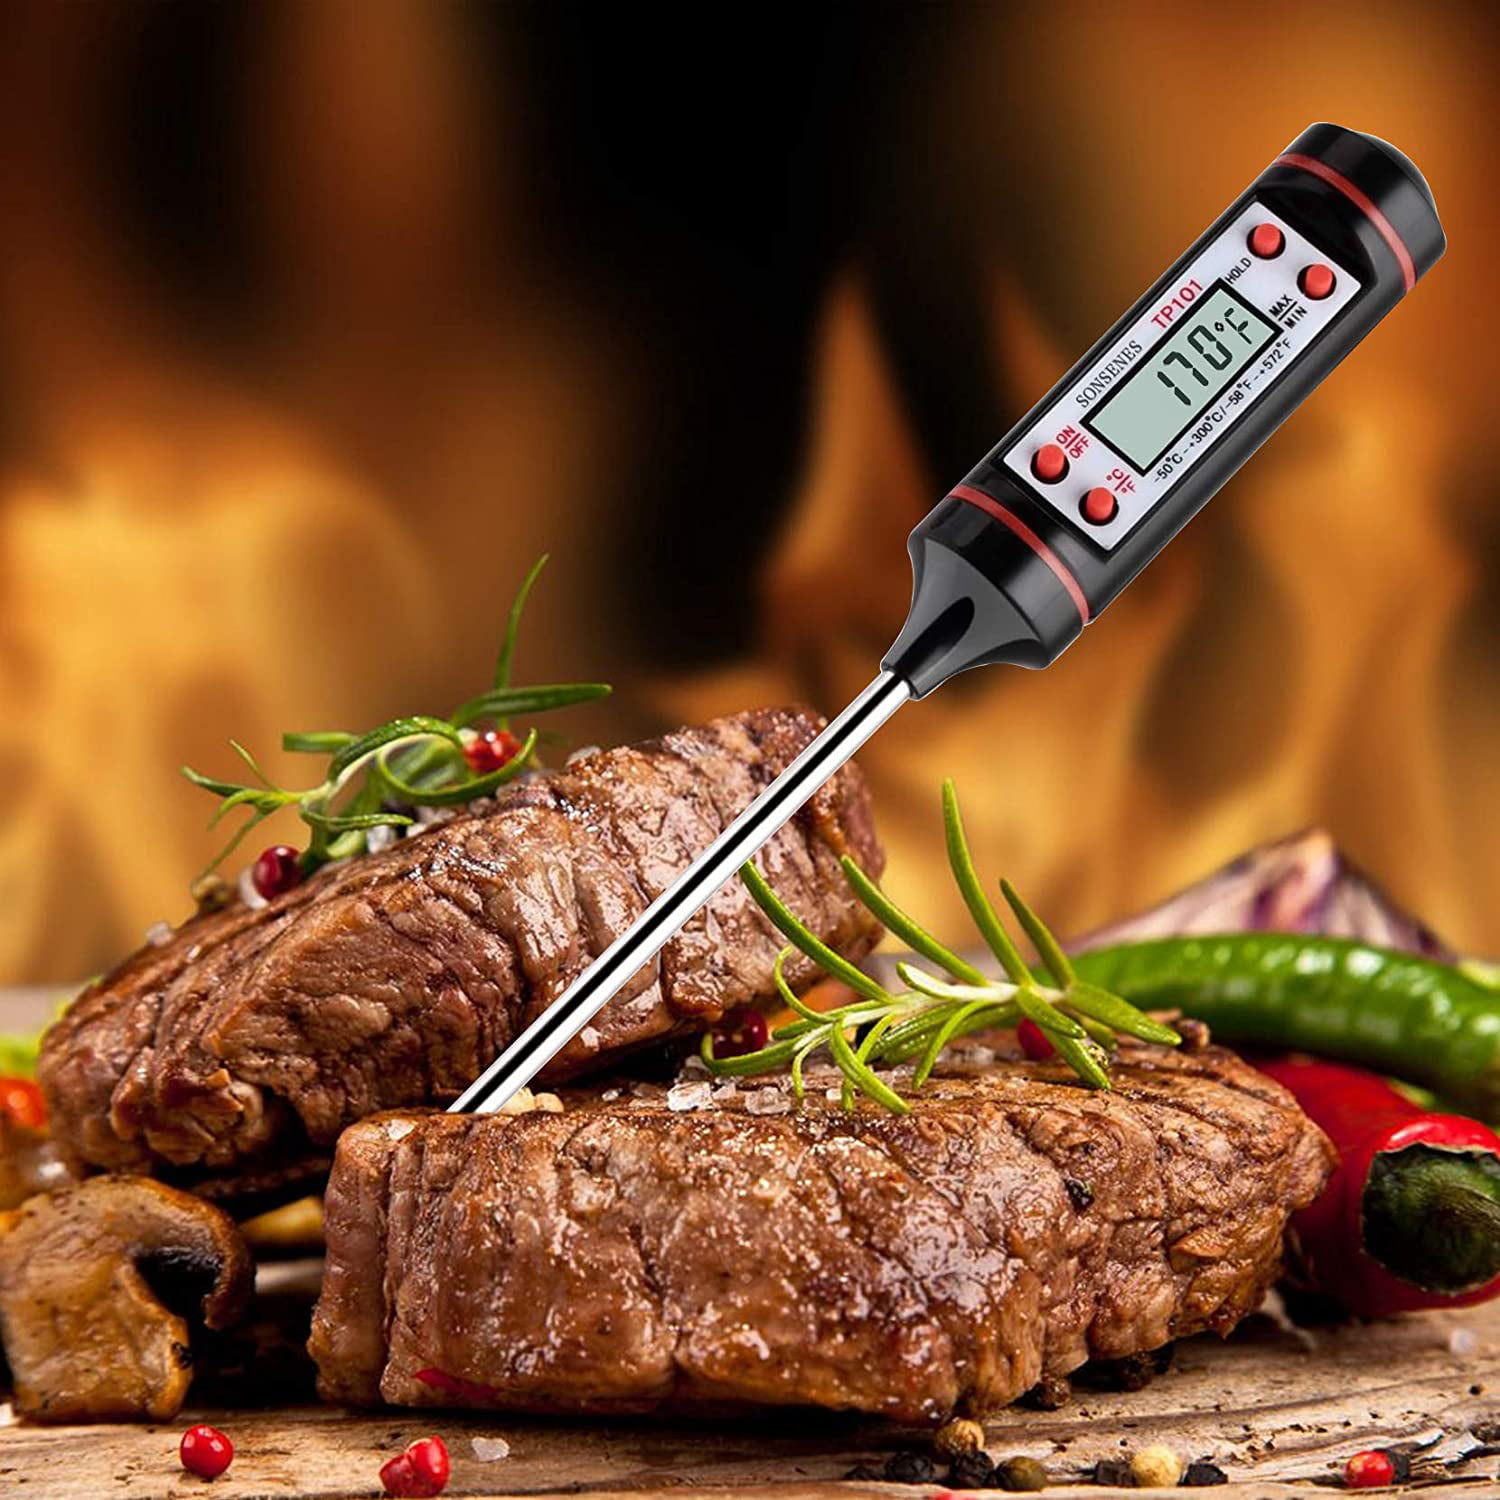 Plug-in Bread Solid Liquid Household Stainless Steel Probe Thermometer